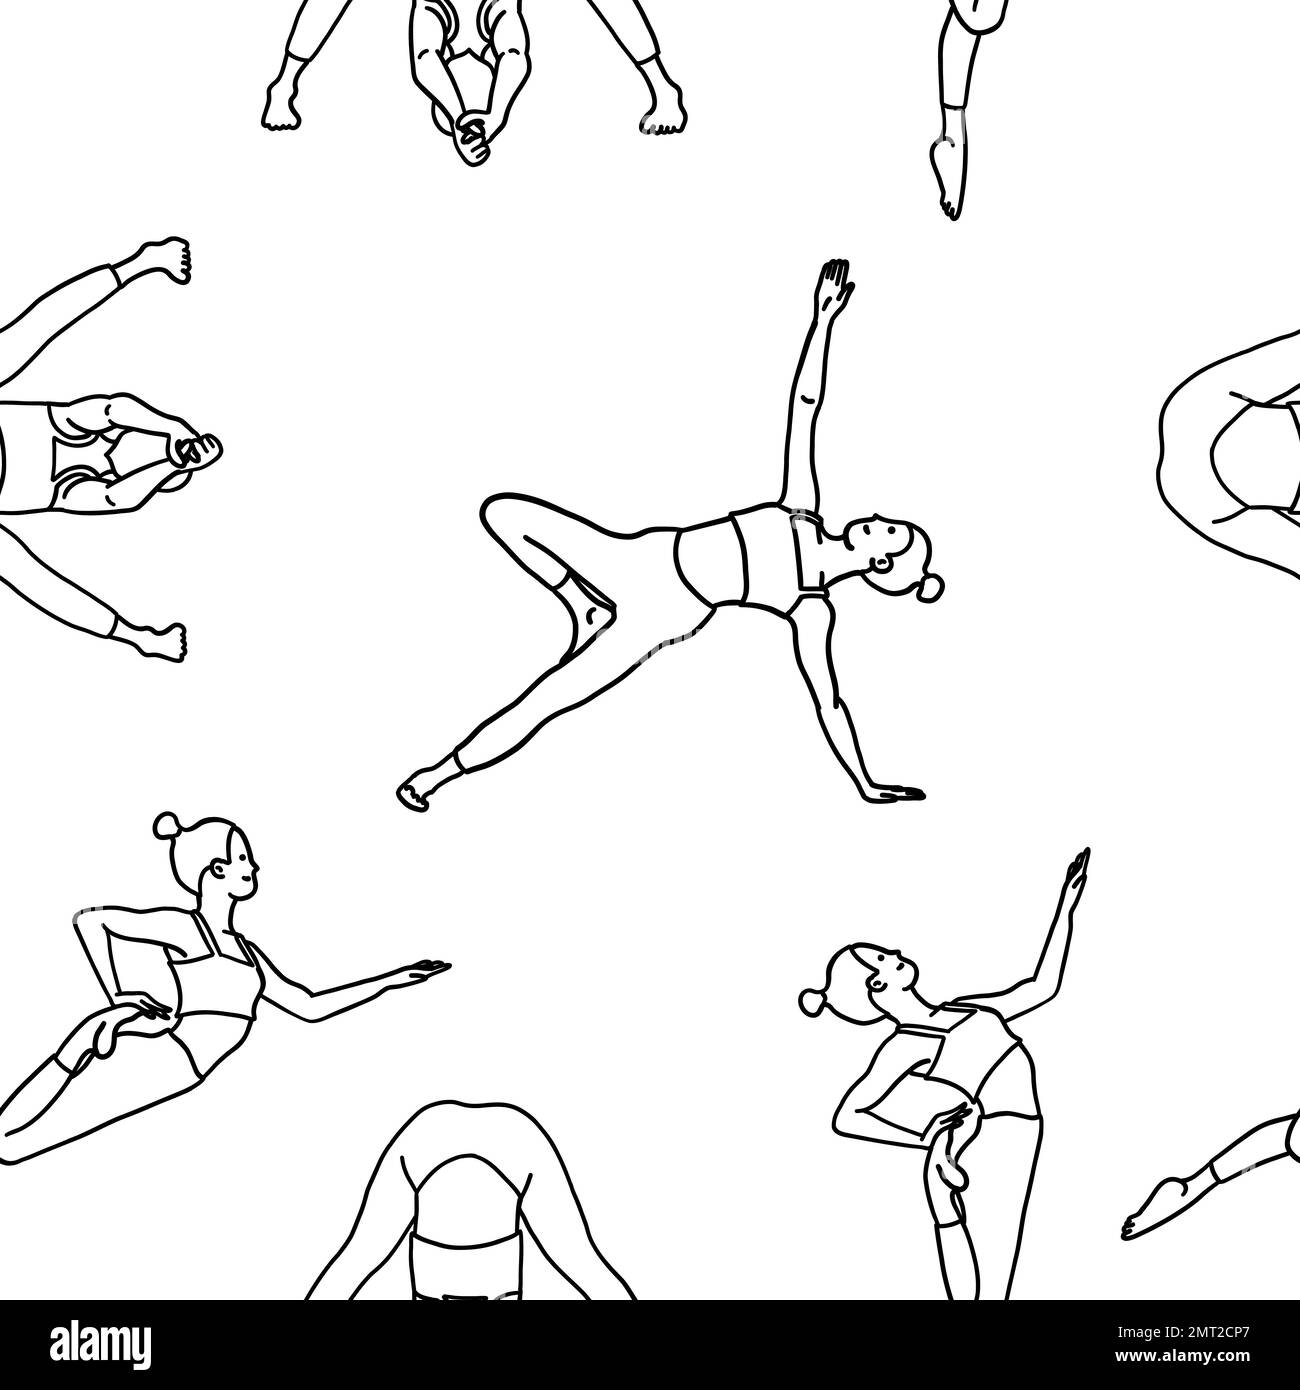 Seamless pattern wallpaper. Yoga poses collection. Black and white ...